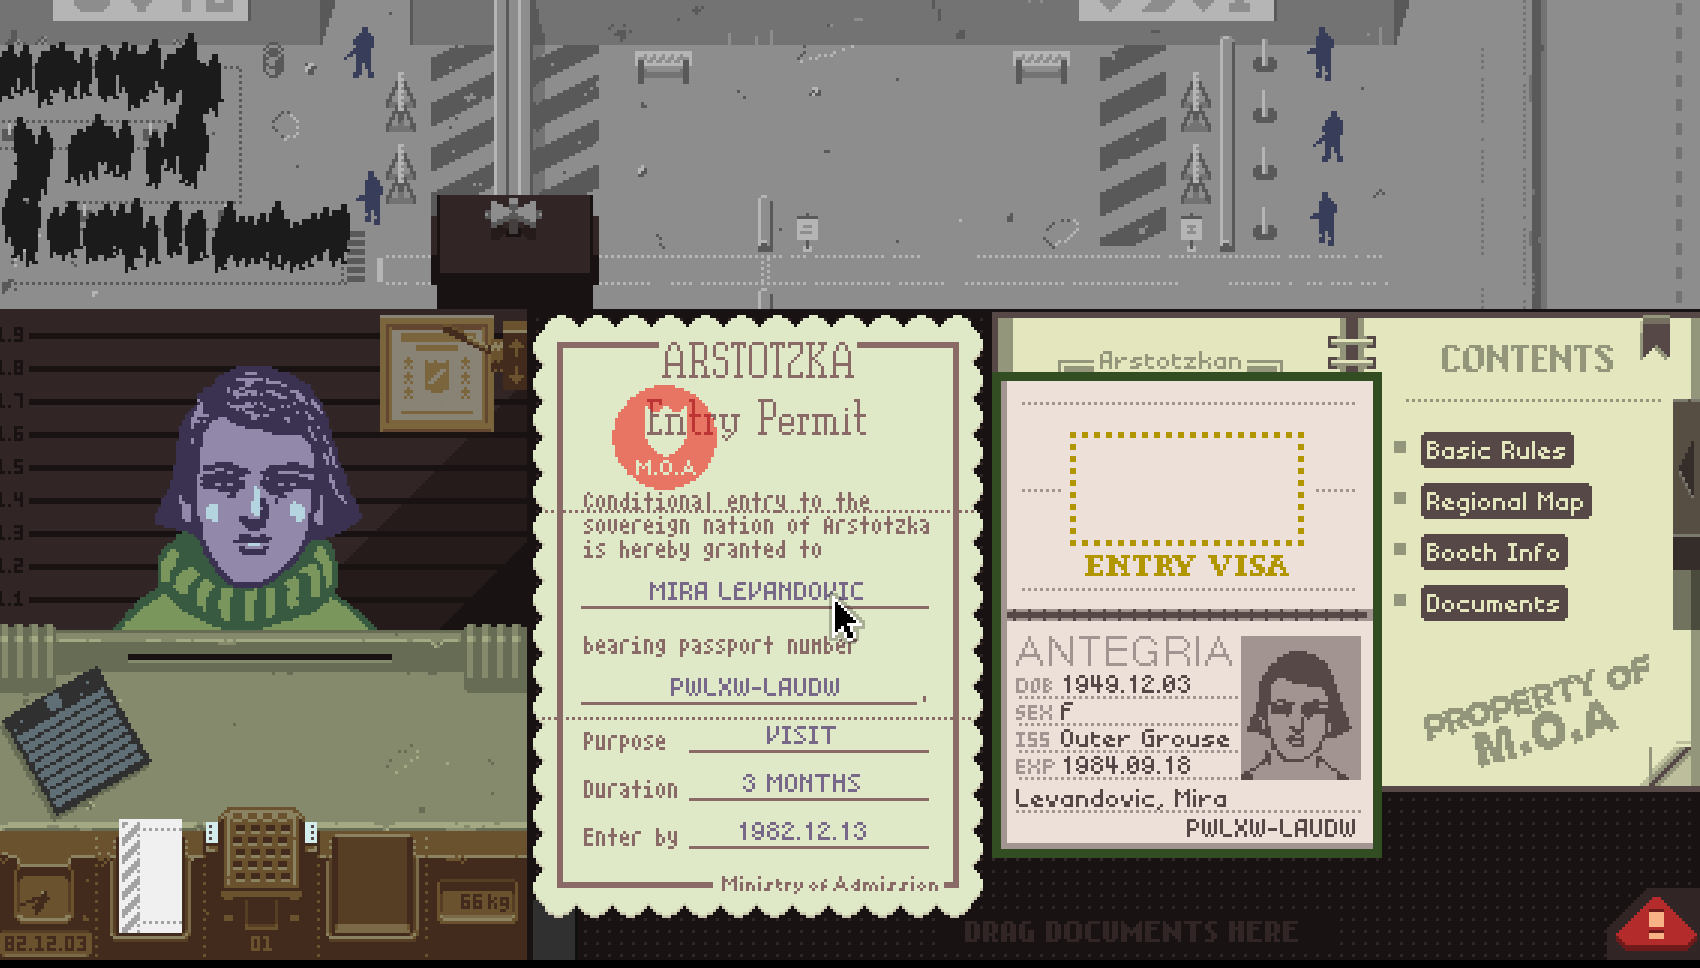 papers please game temporary visa template